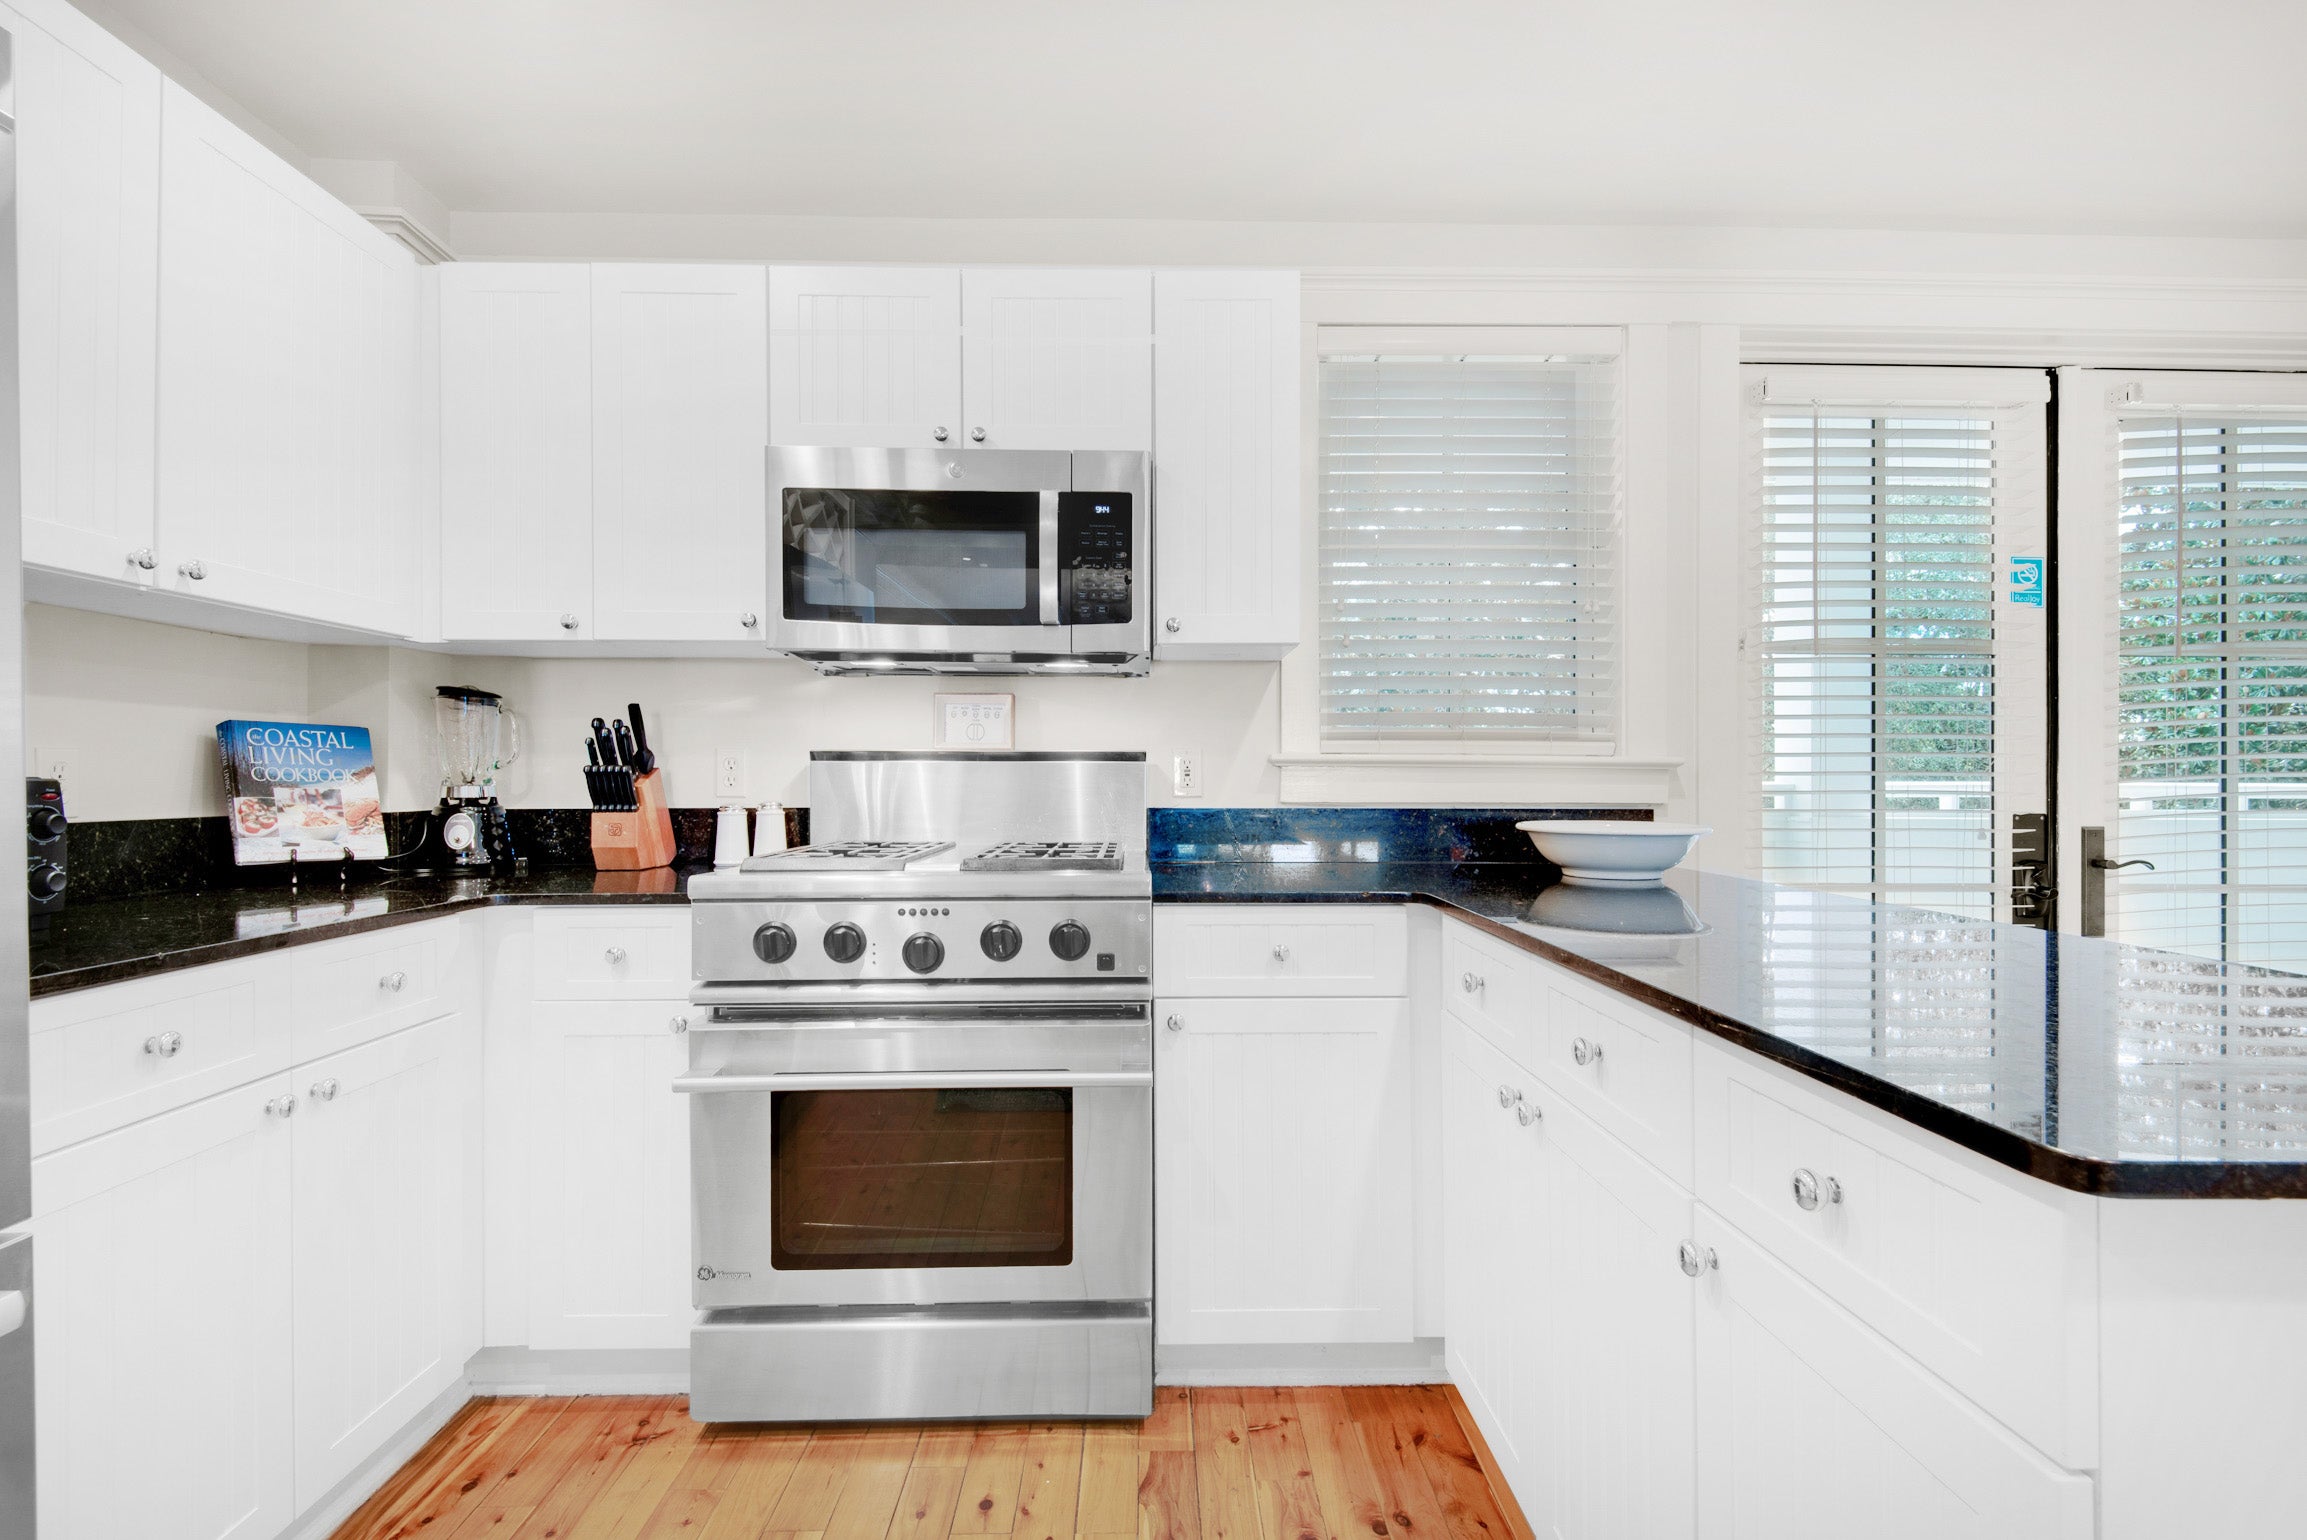 Stainless steel appliances